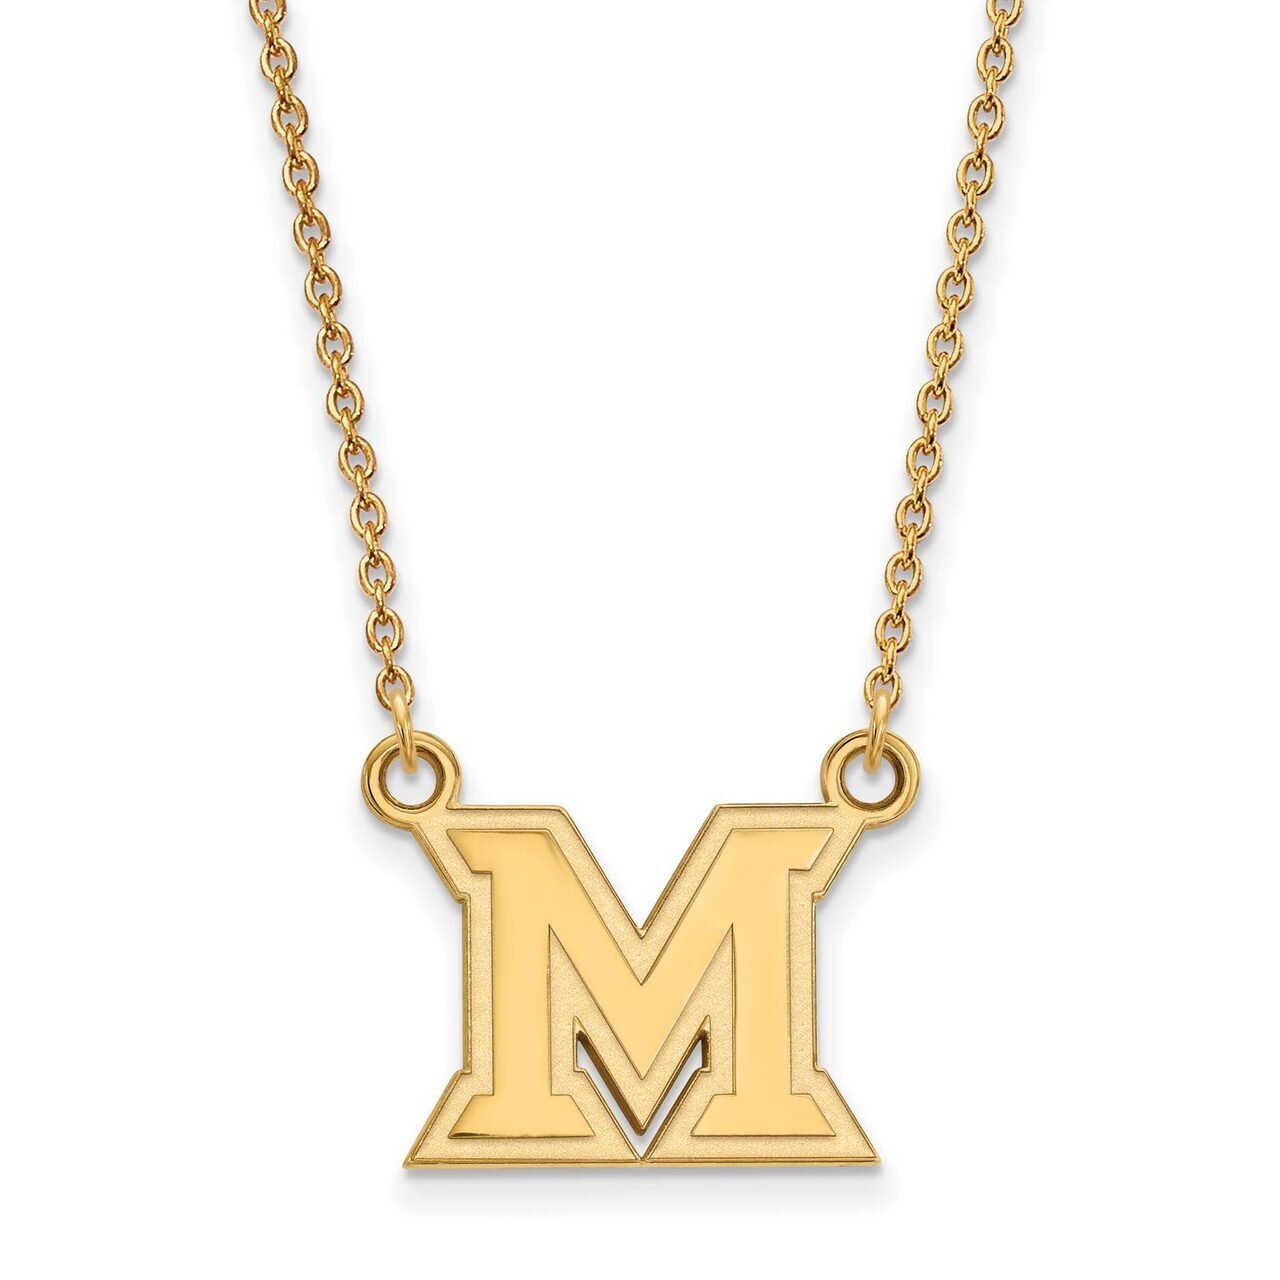 Miami University Small Pendant with Chain Necklace 14k Yellow Gold 4Y011MU-18